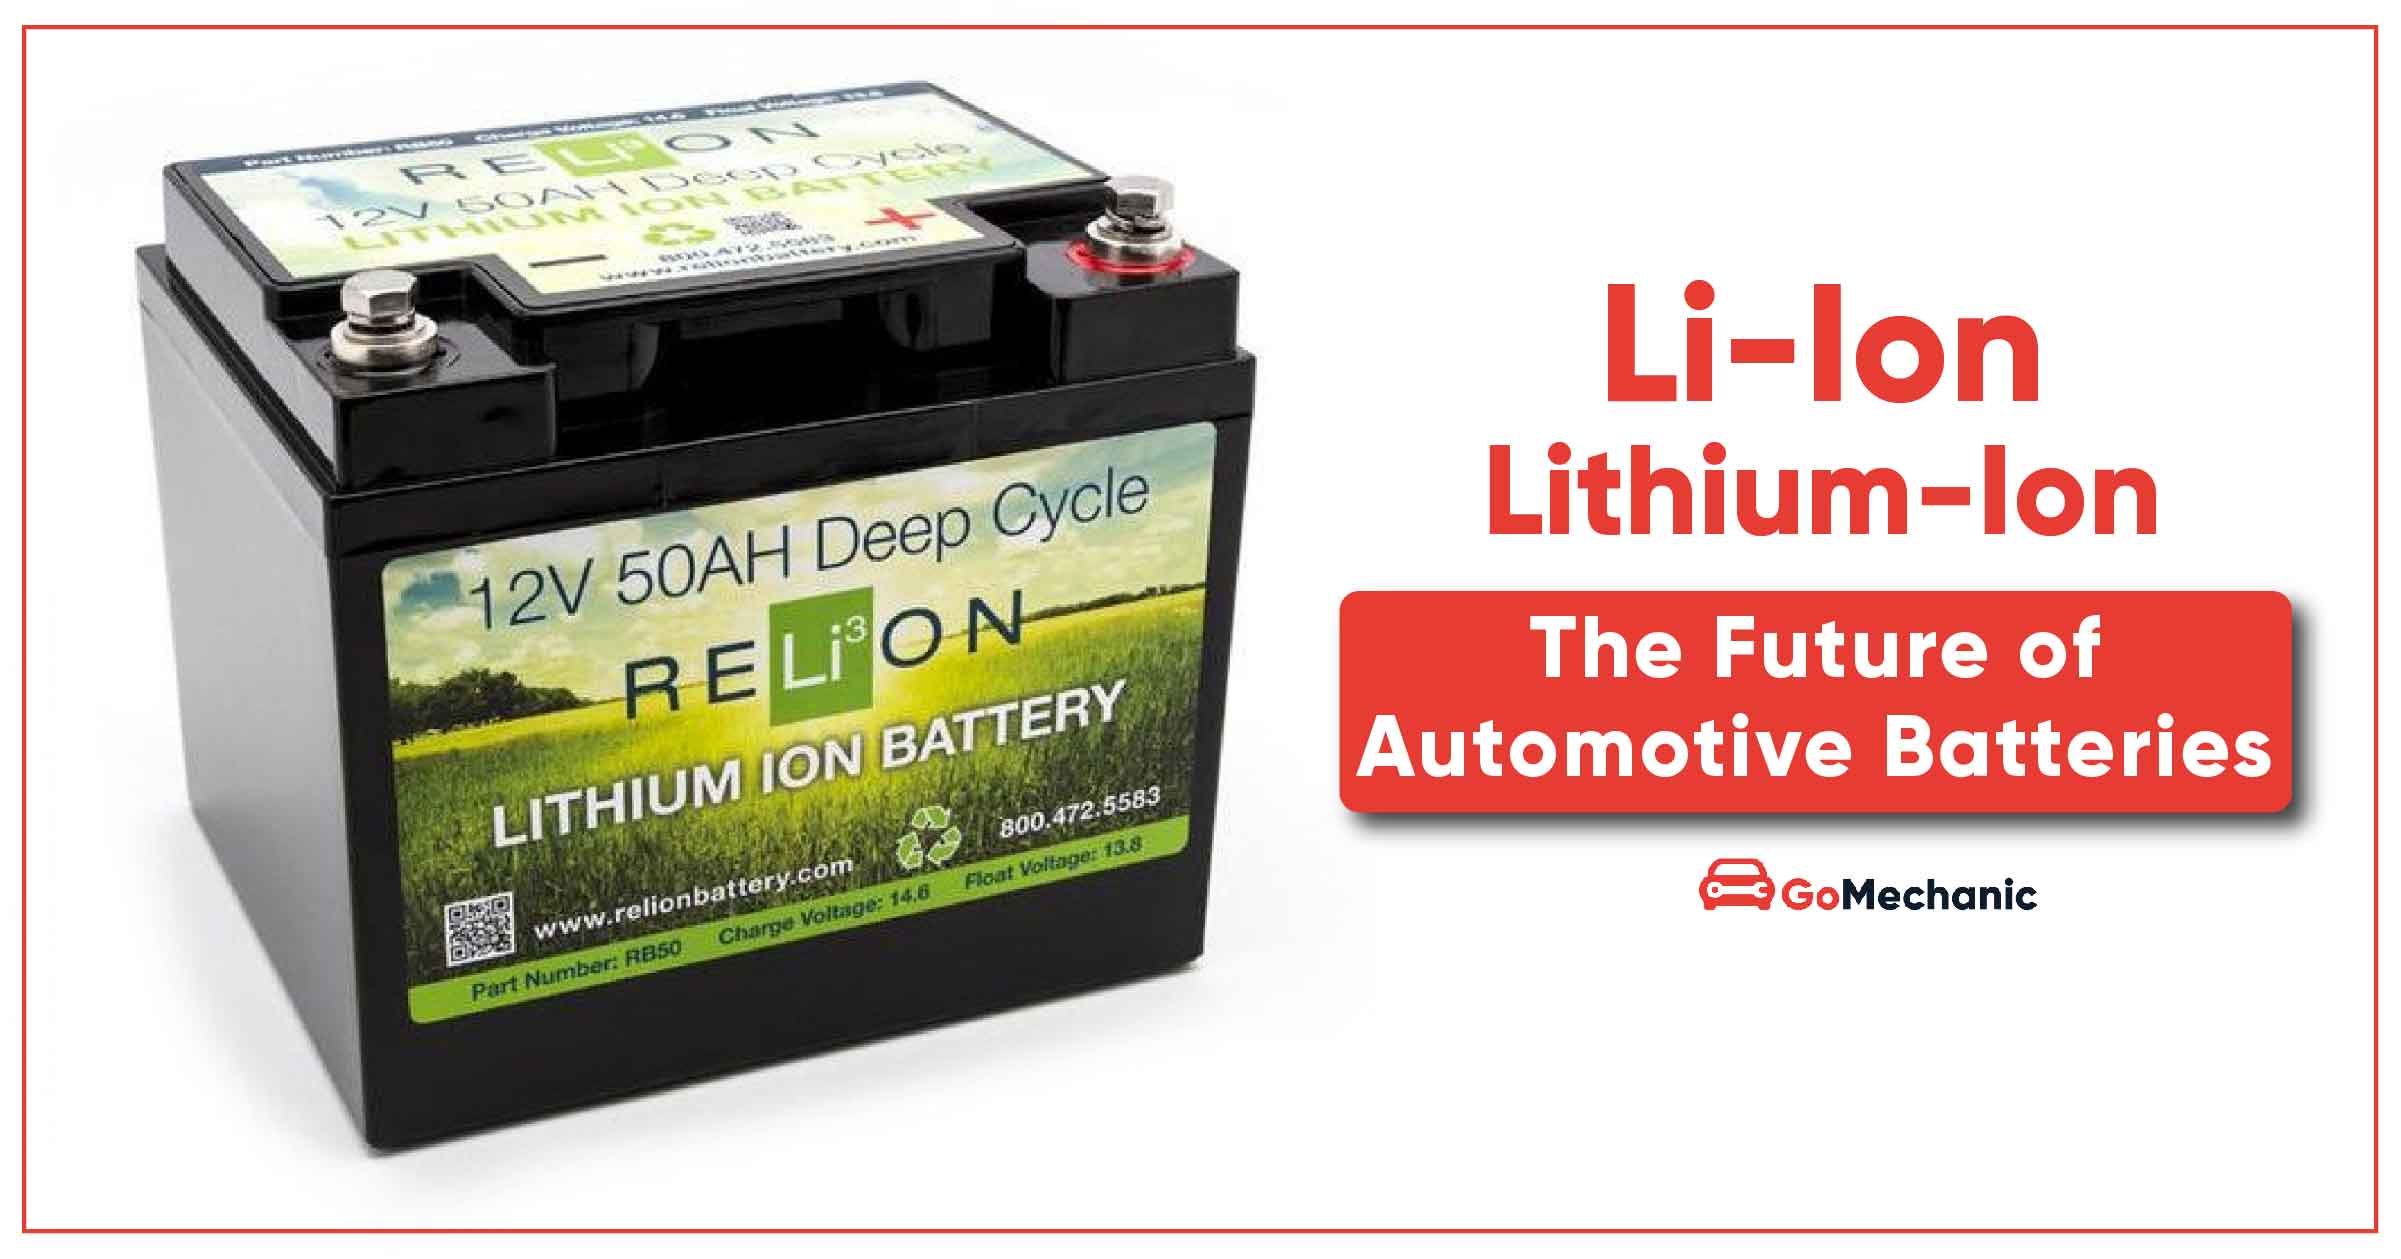 Lithium-ion | The Future of Automotive Batteries